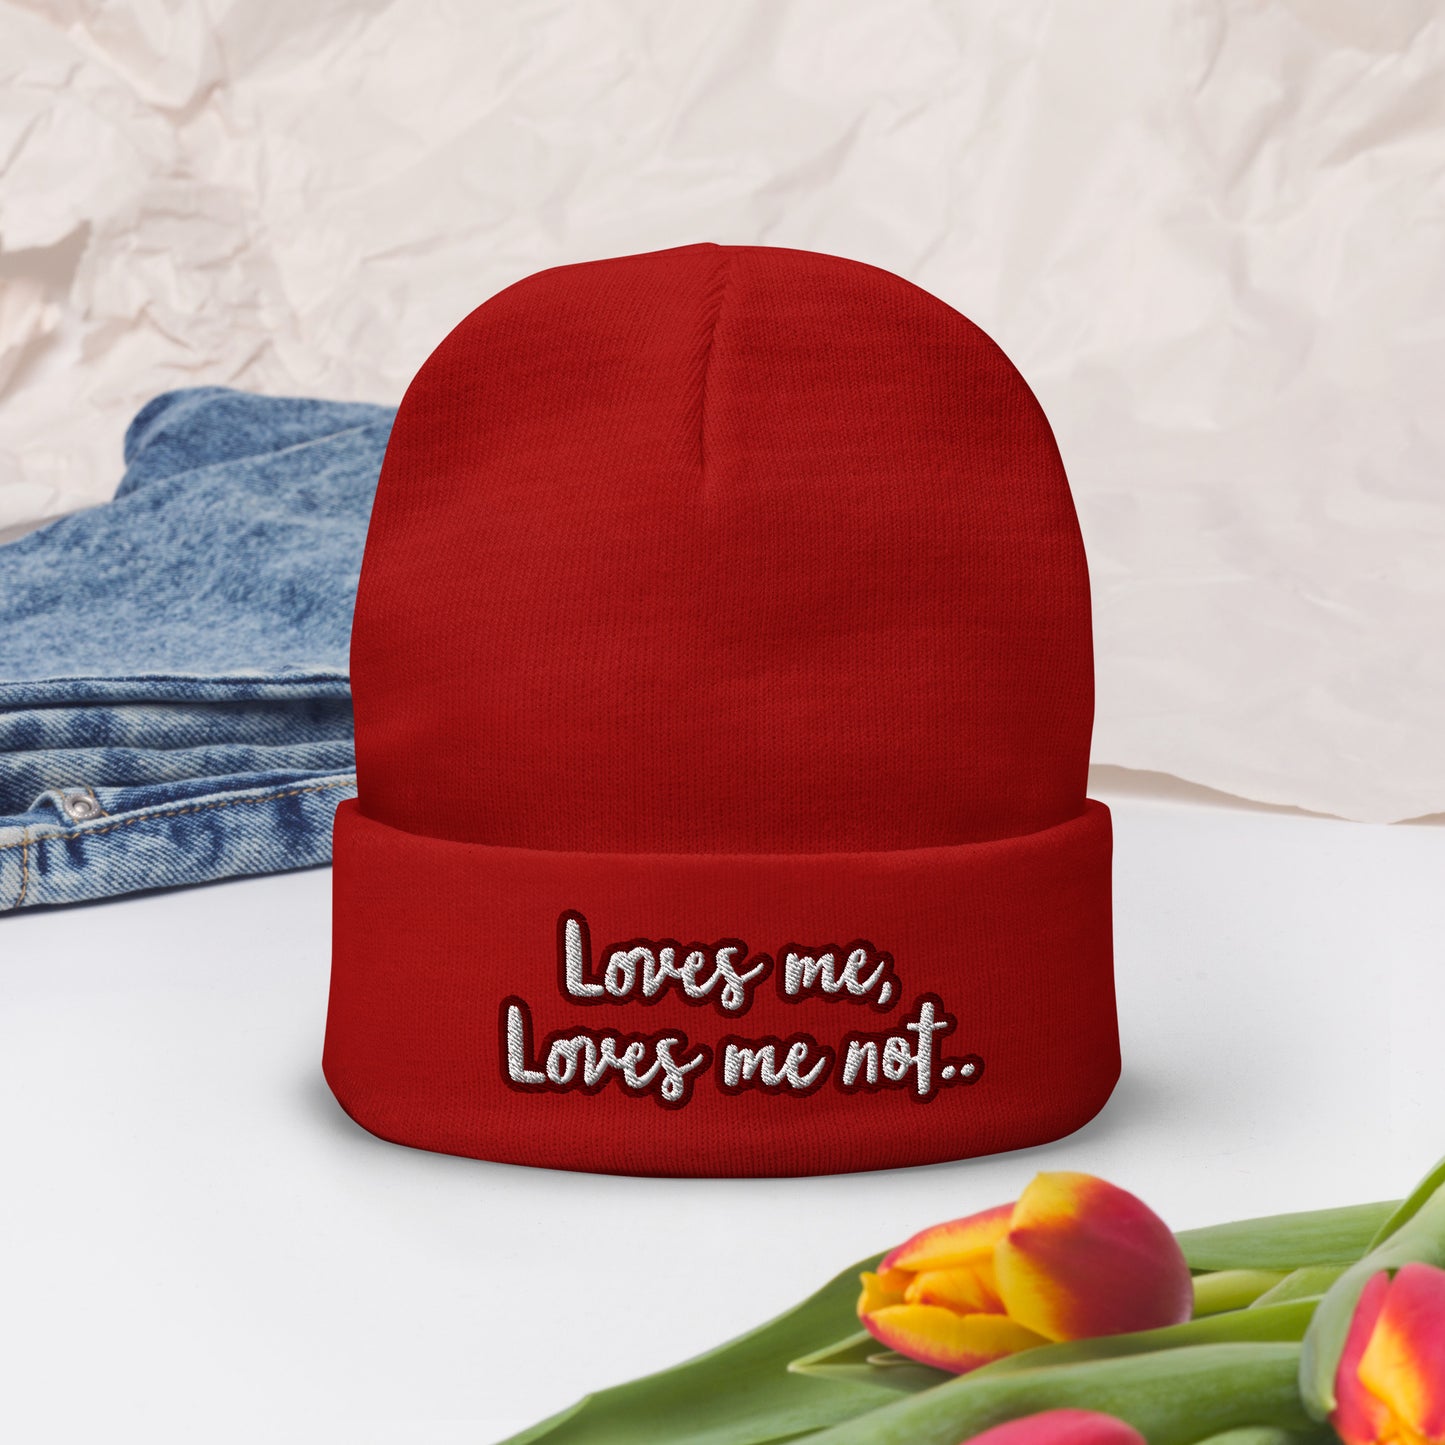 Loves me, loves me not by Irma Embroidered Beanie